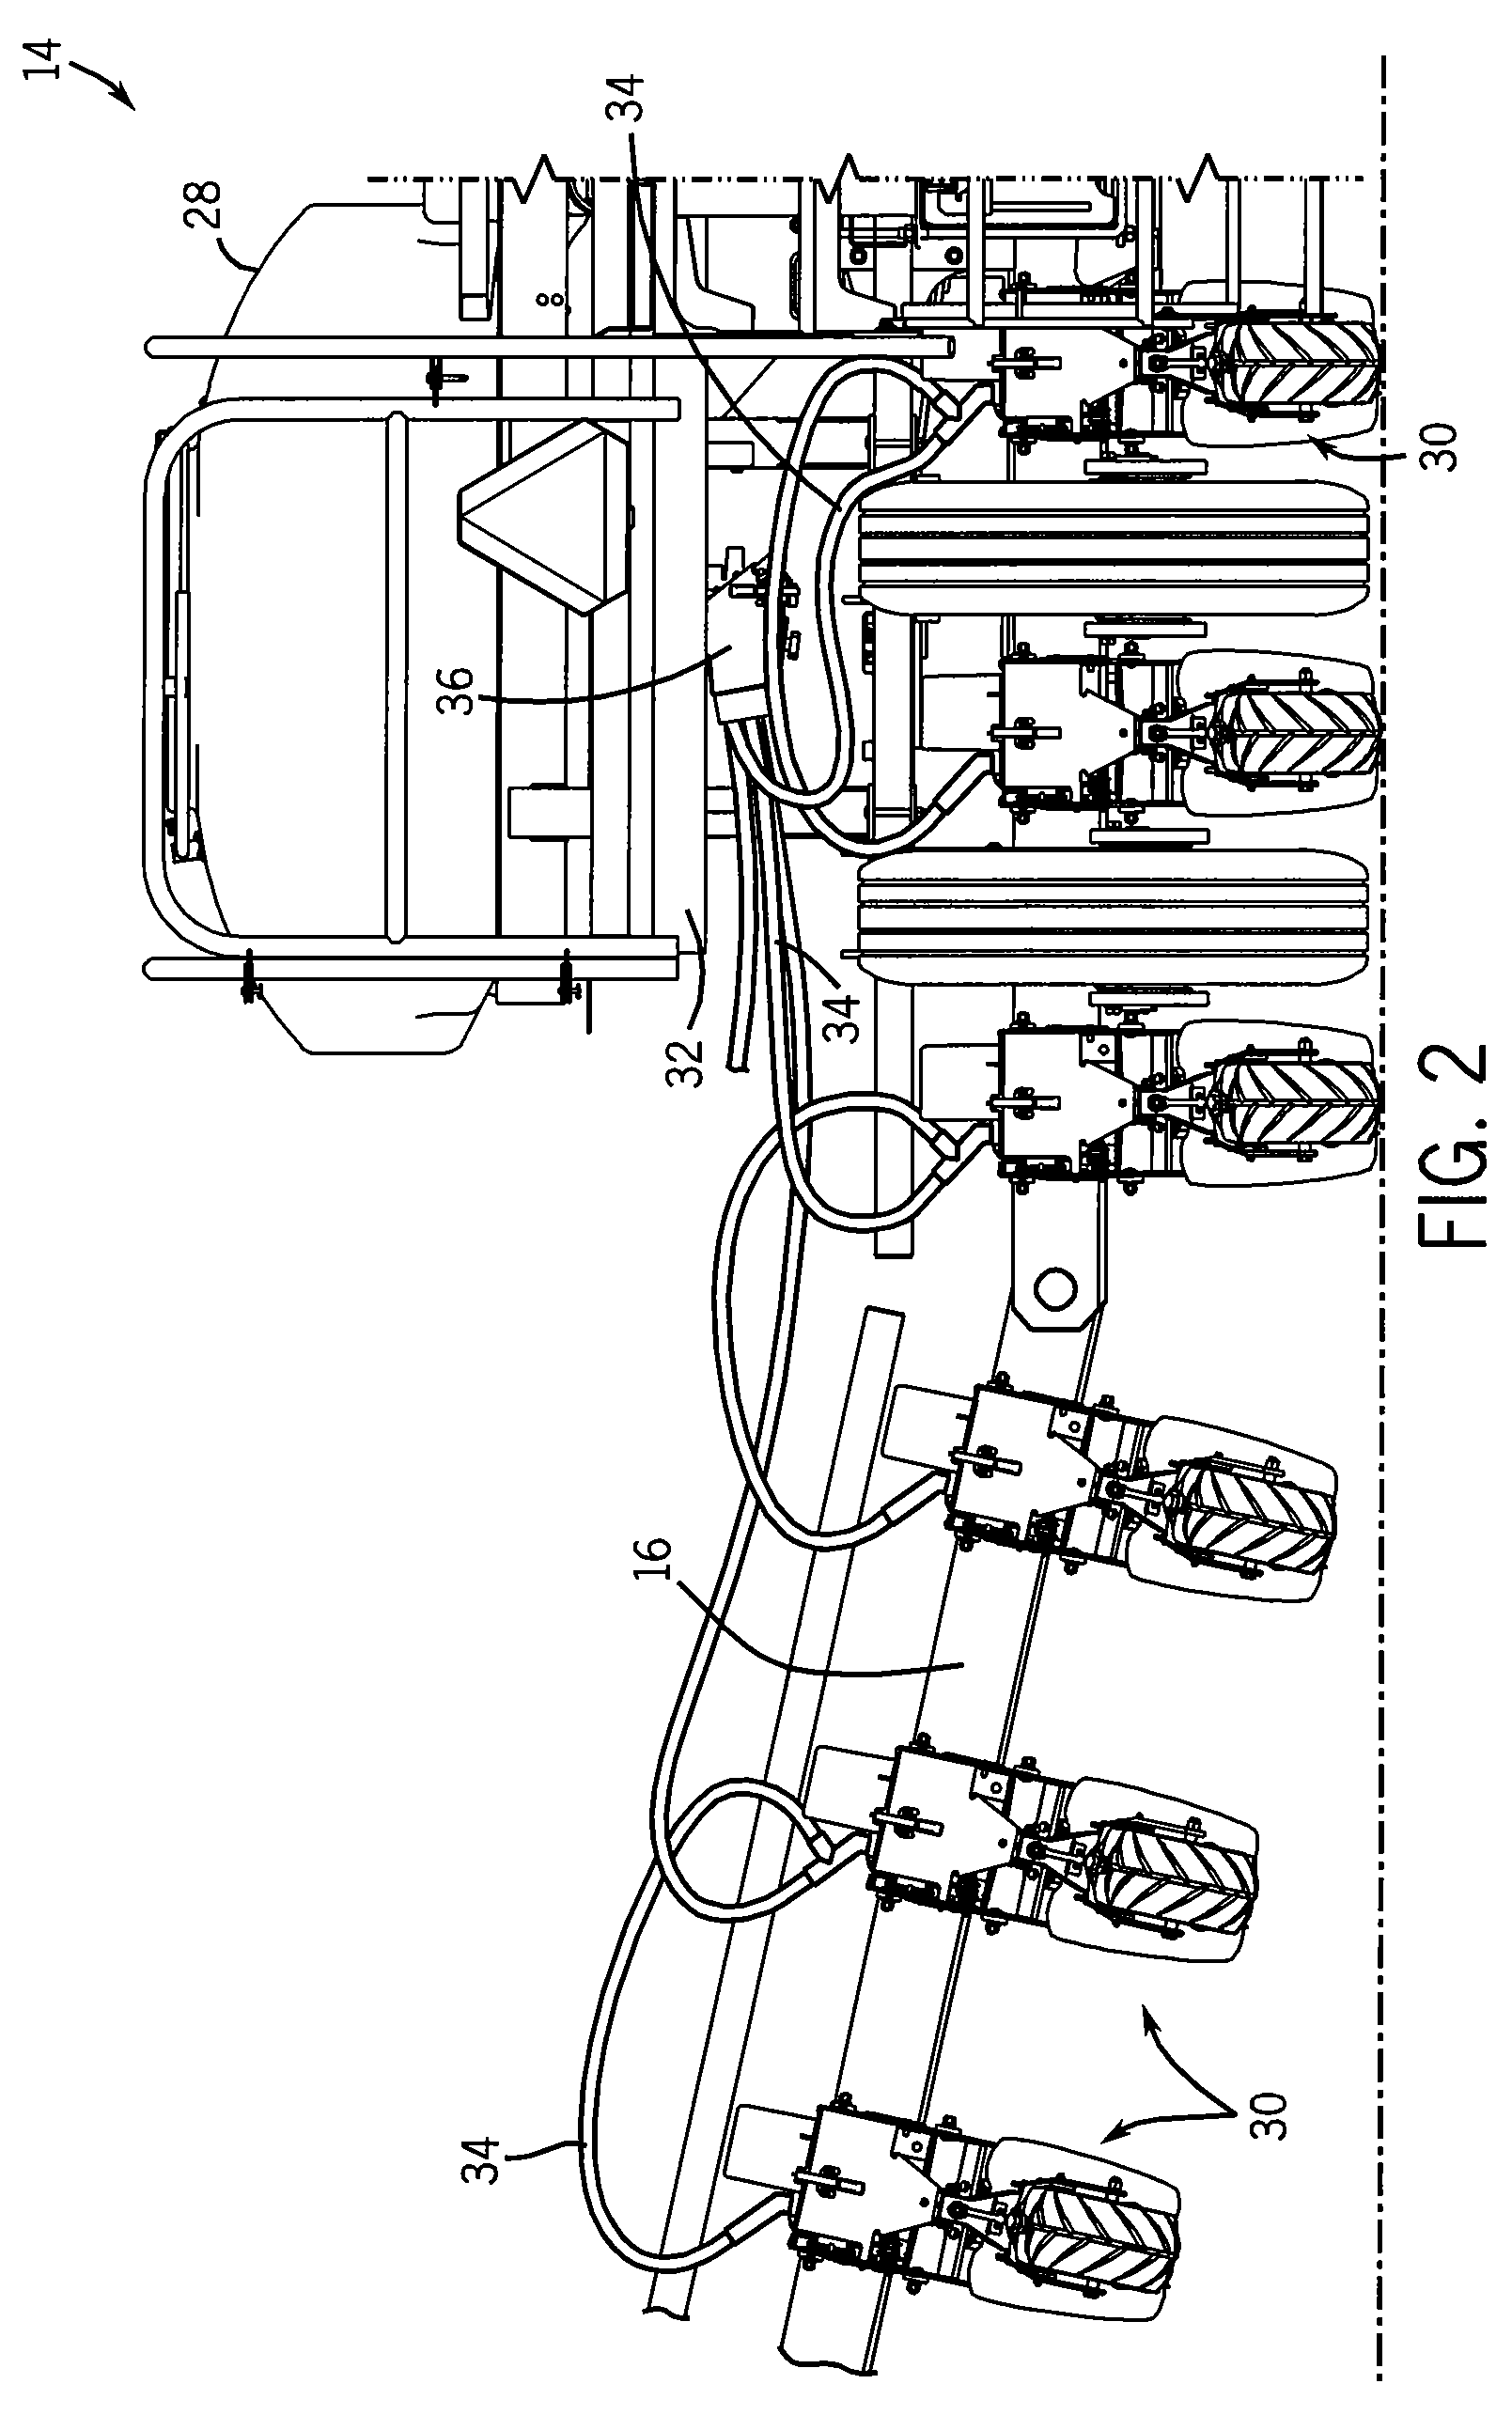 Method and apparatus for regulating air flow through supply conduits through which product entrained in an air flow is provided to multiple on-row product containers of an agricultural implement